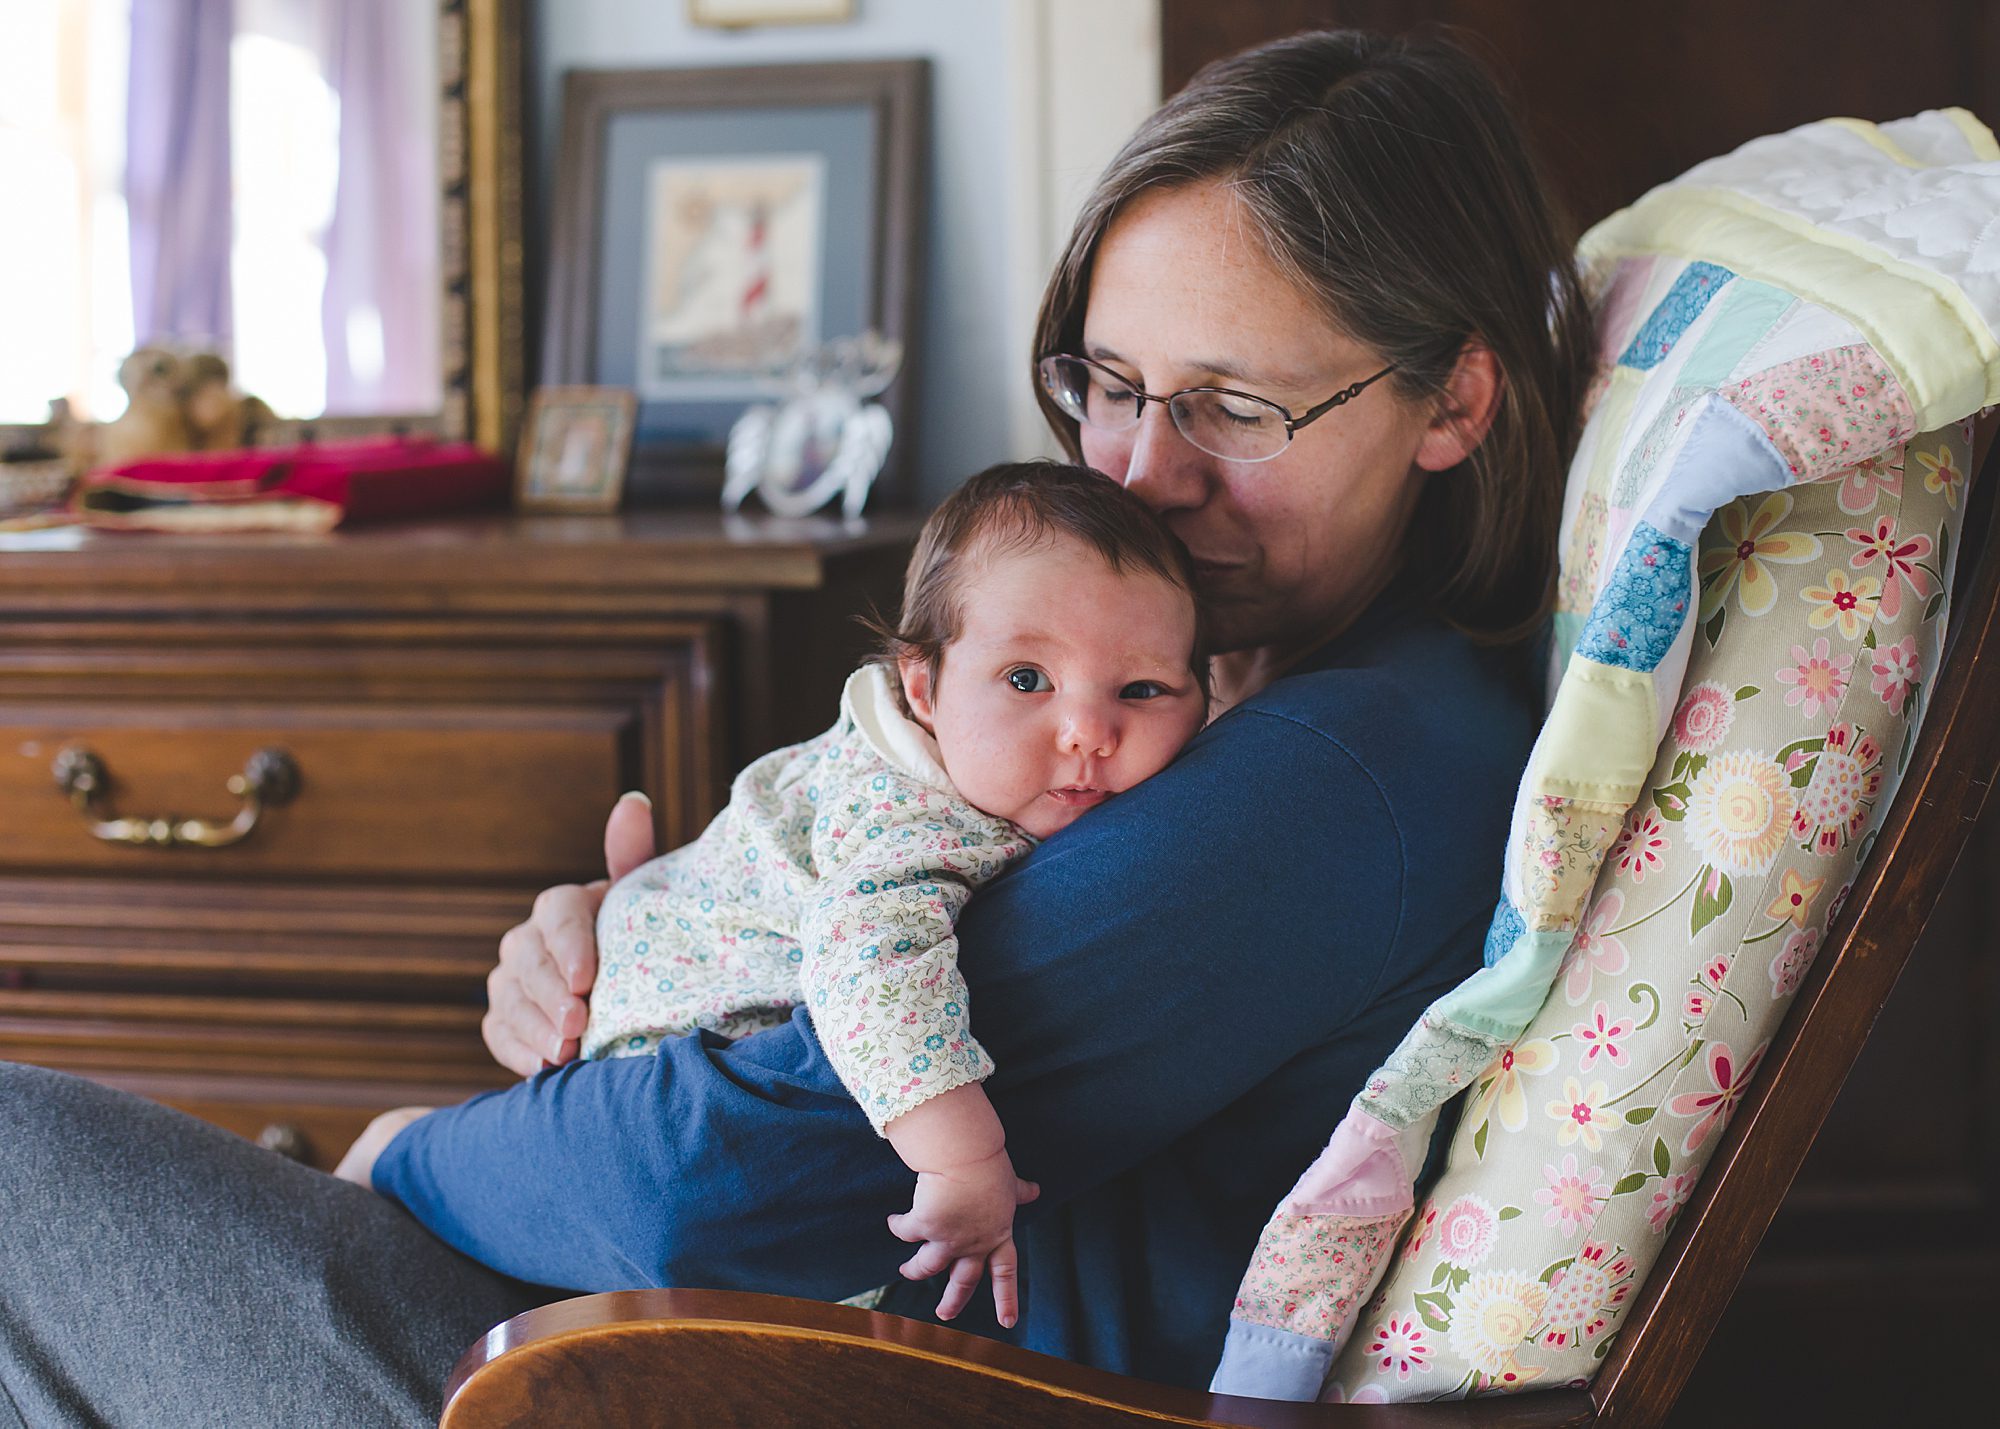 A mom kissing and holding a baby in rocking chair.